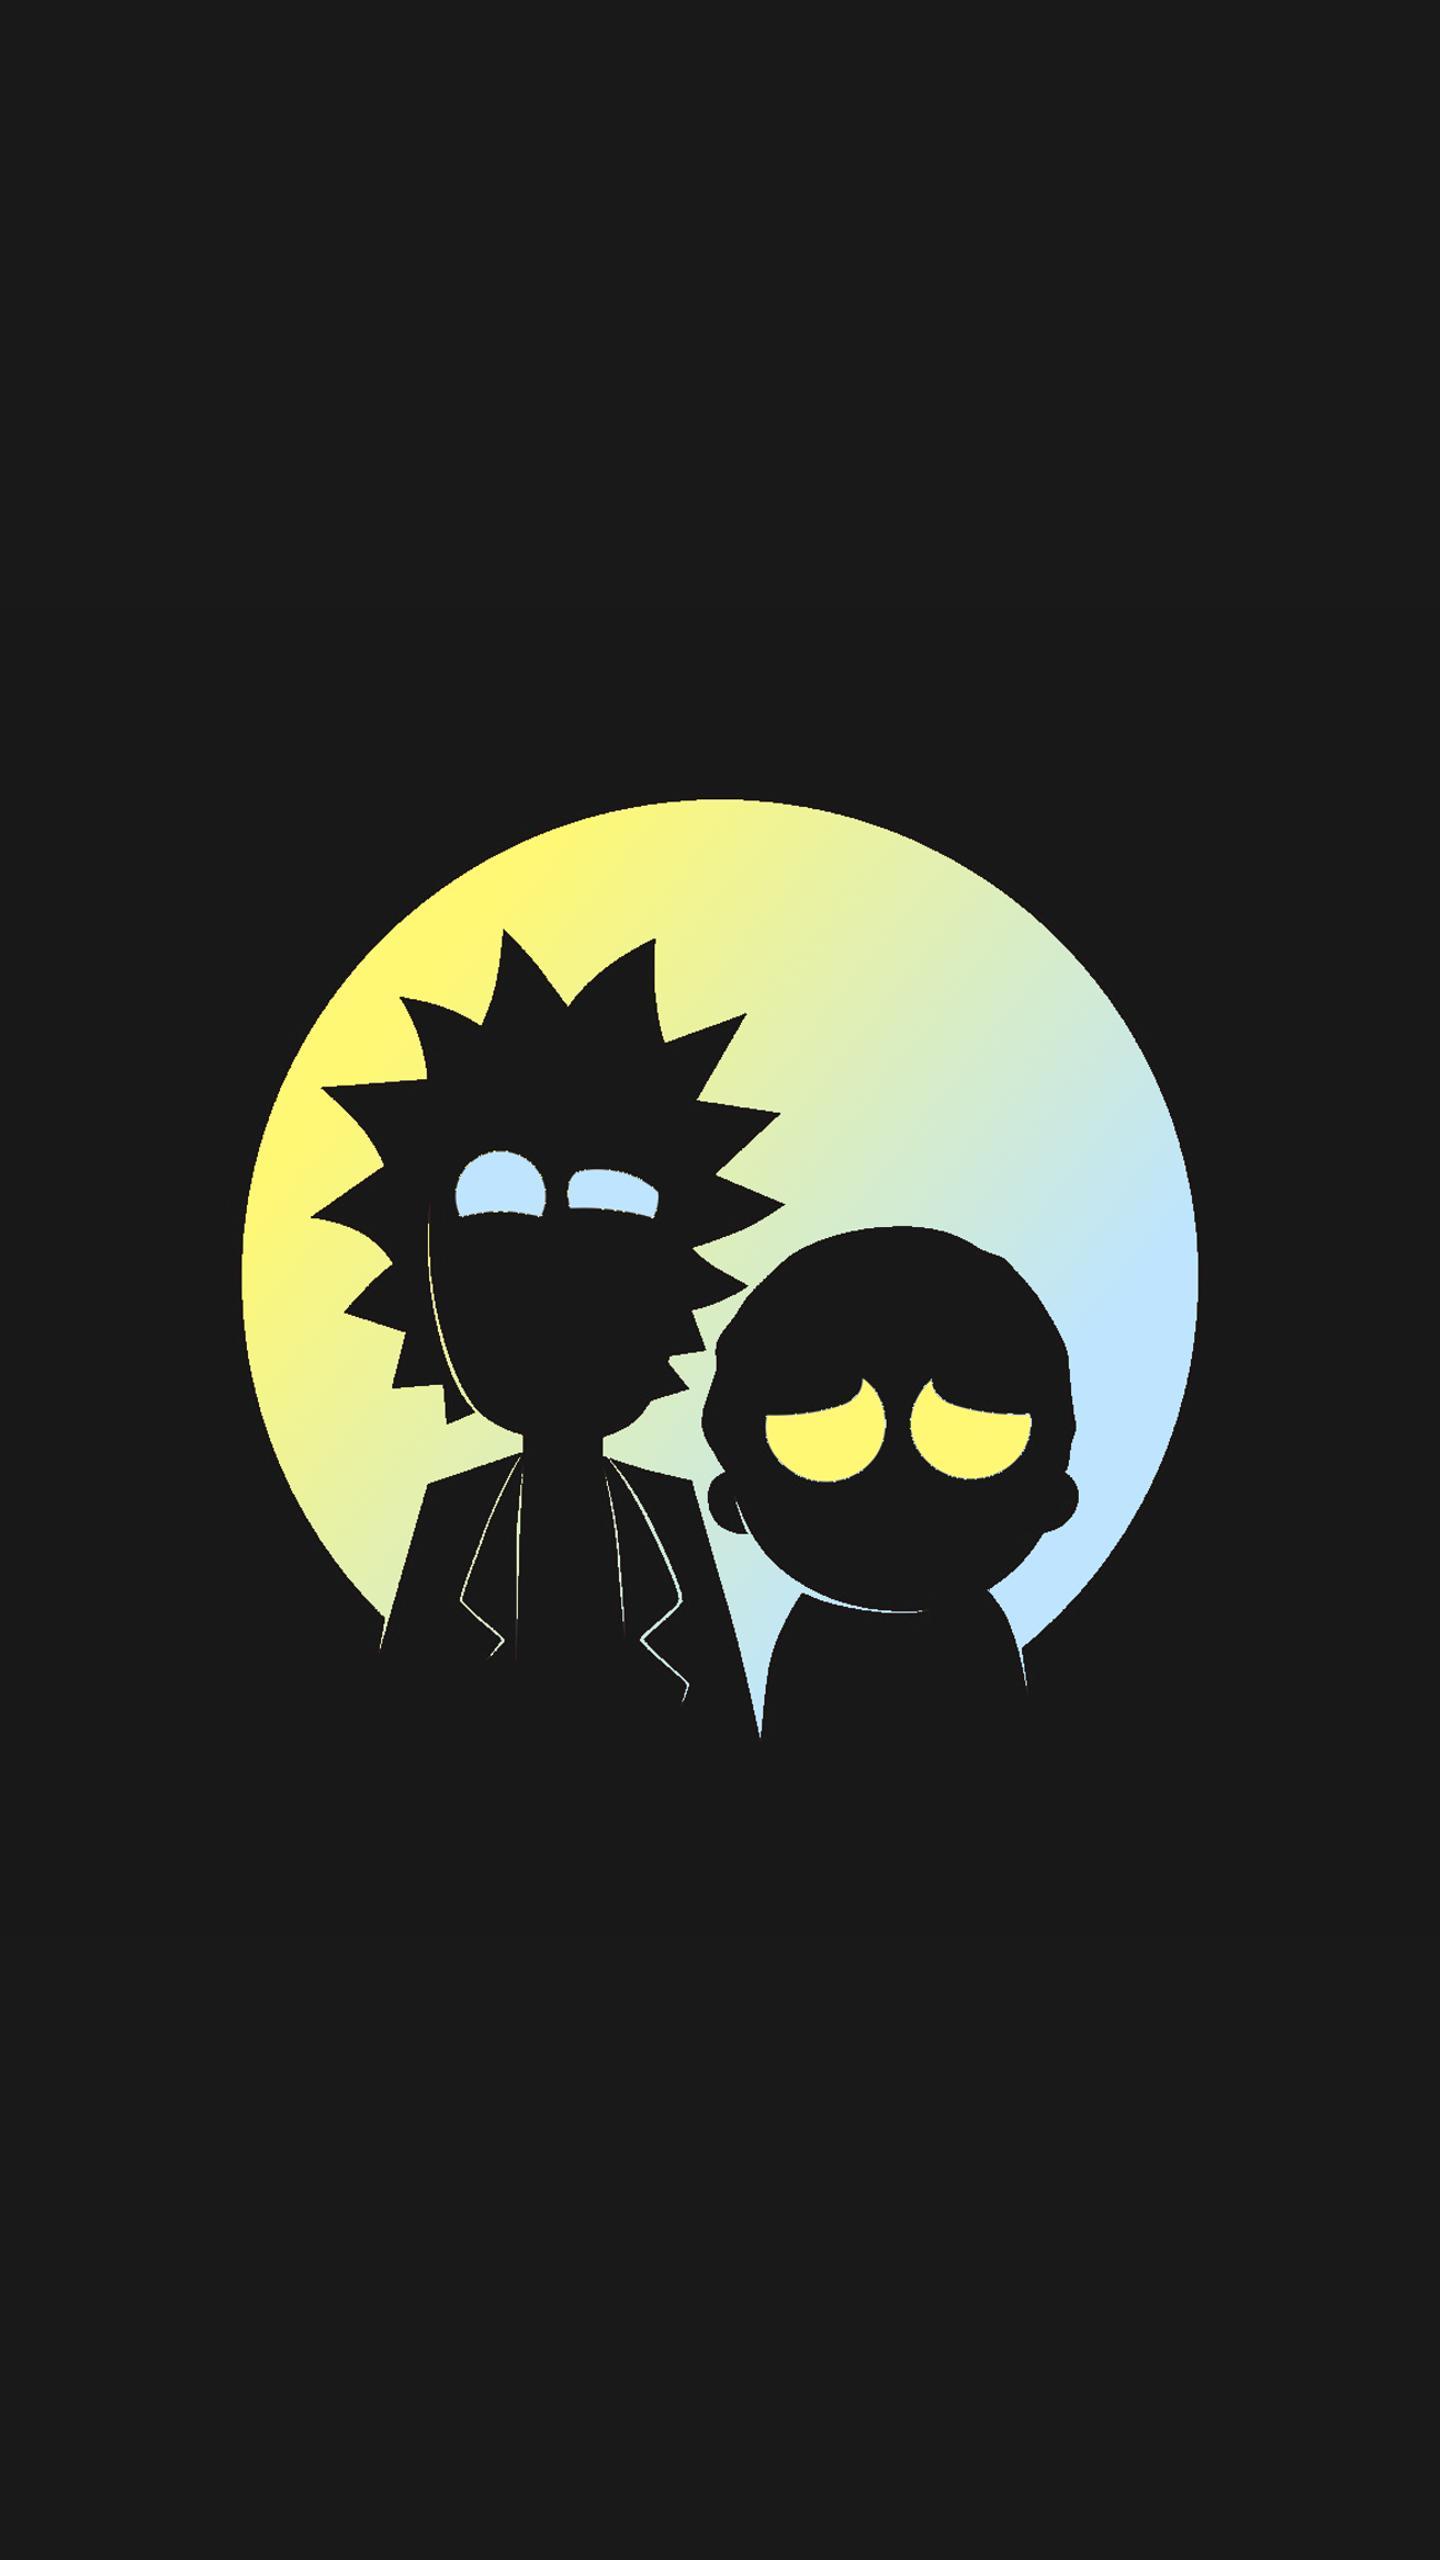 Rick and morty mobile wallpaper Gallery